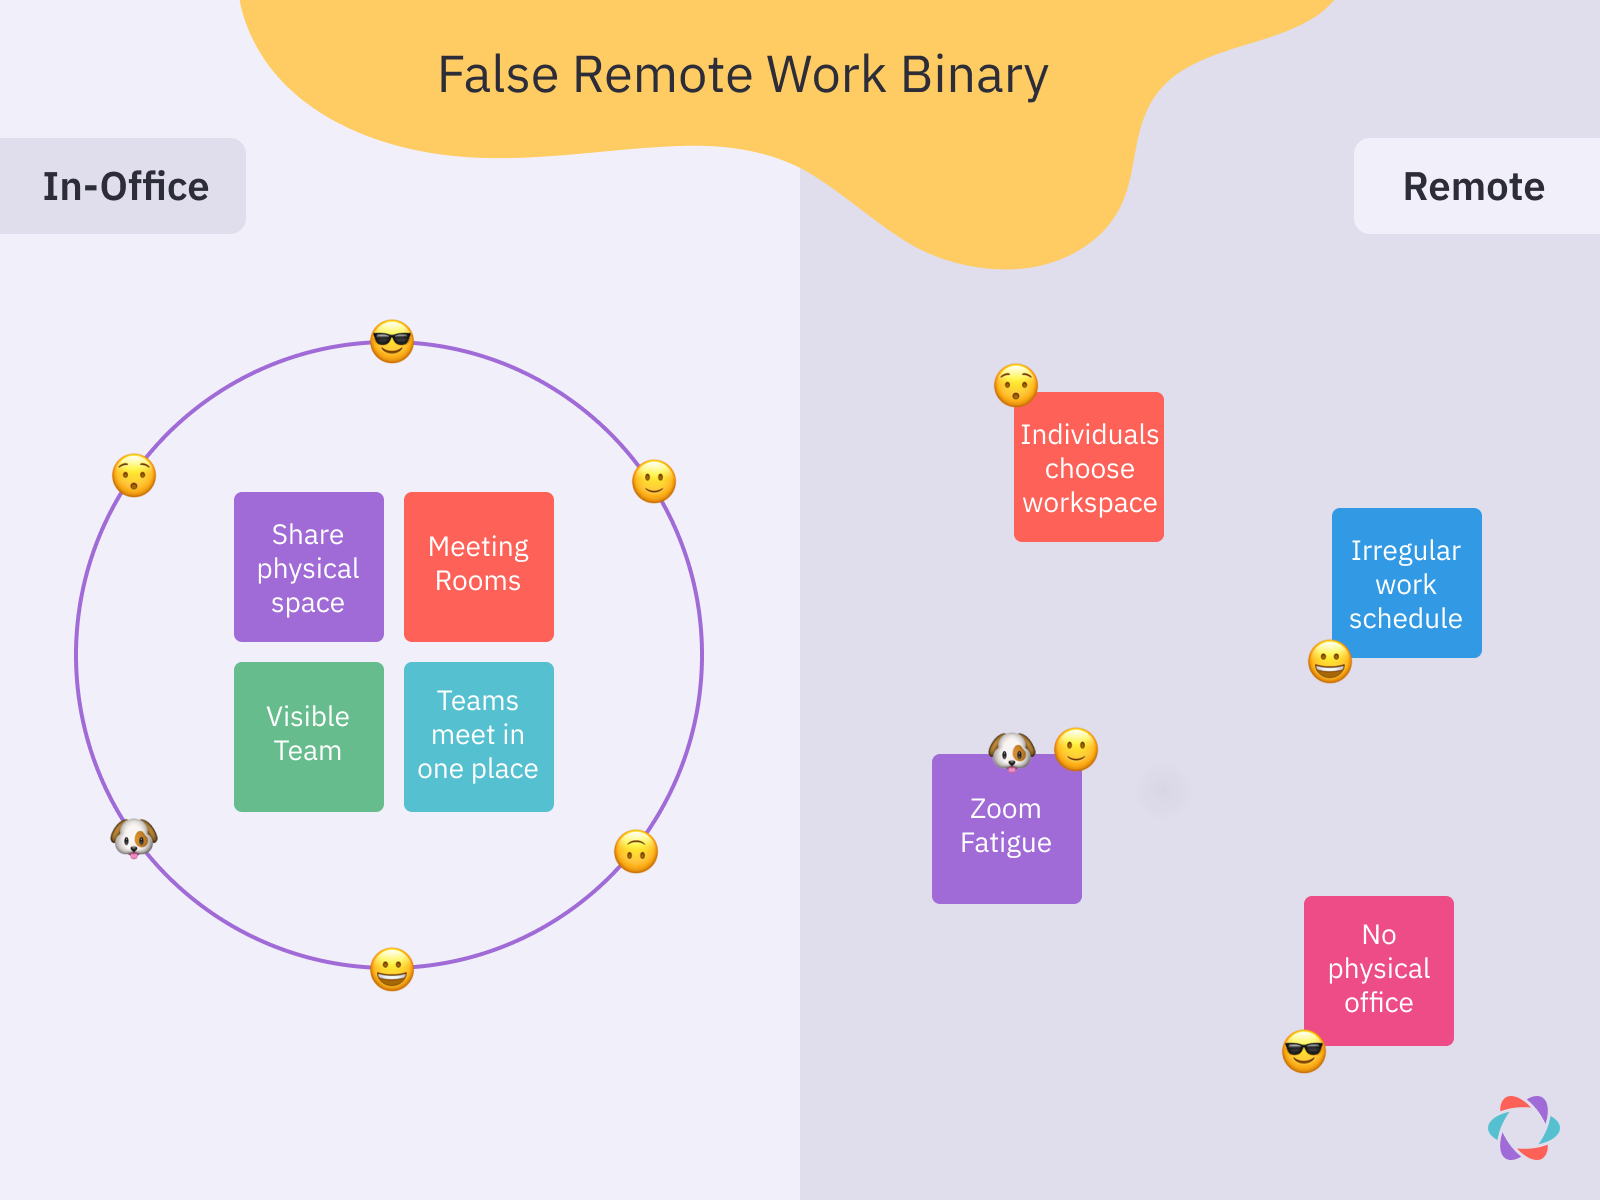 People imagine a false binary between in-office and remote work. 